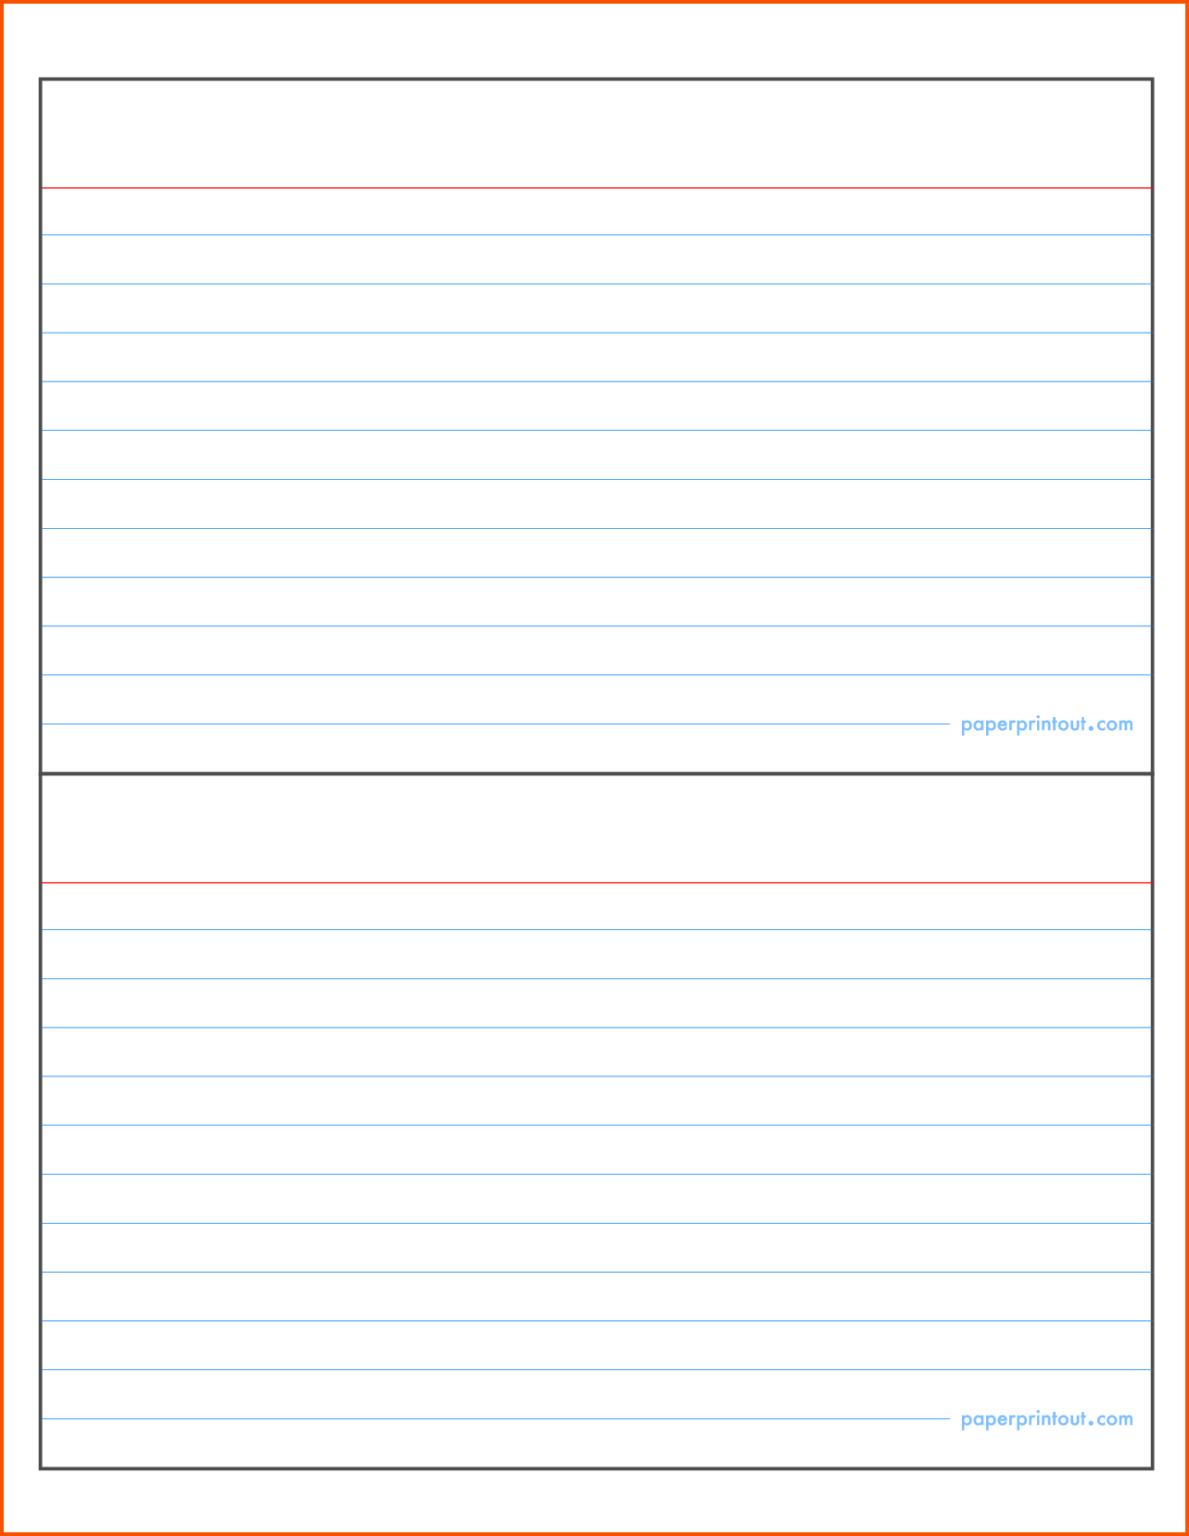 printing-notes-on-actual-note-index-cards-free-word-template-youtube